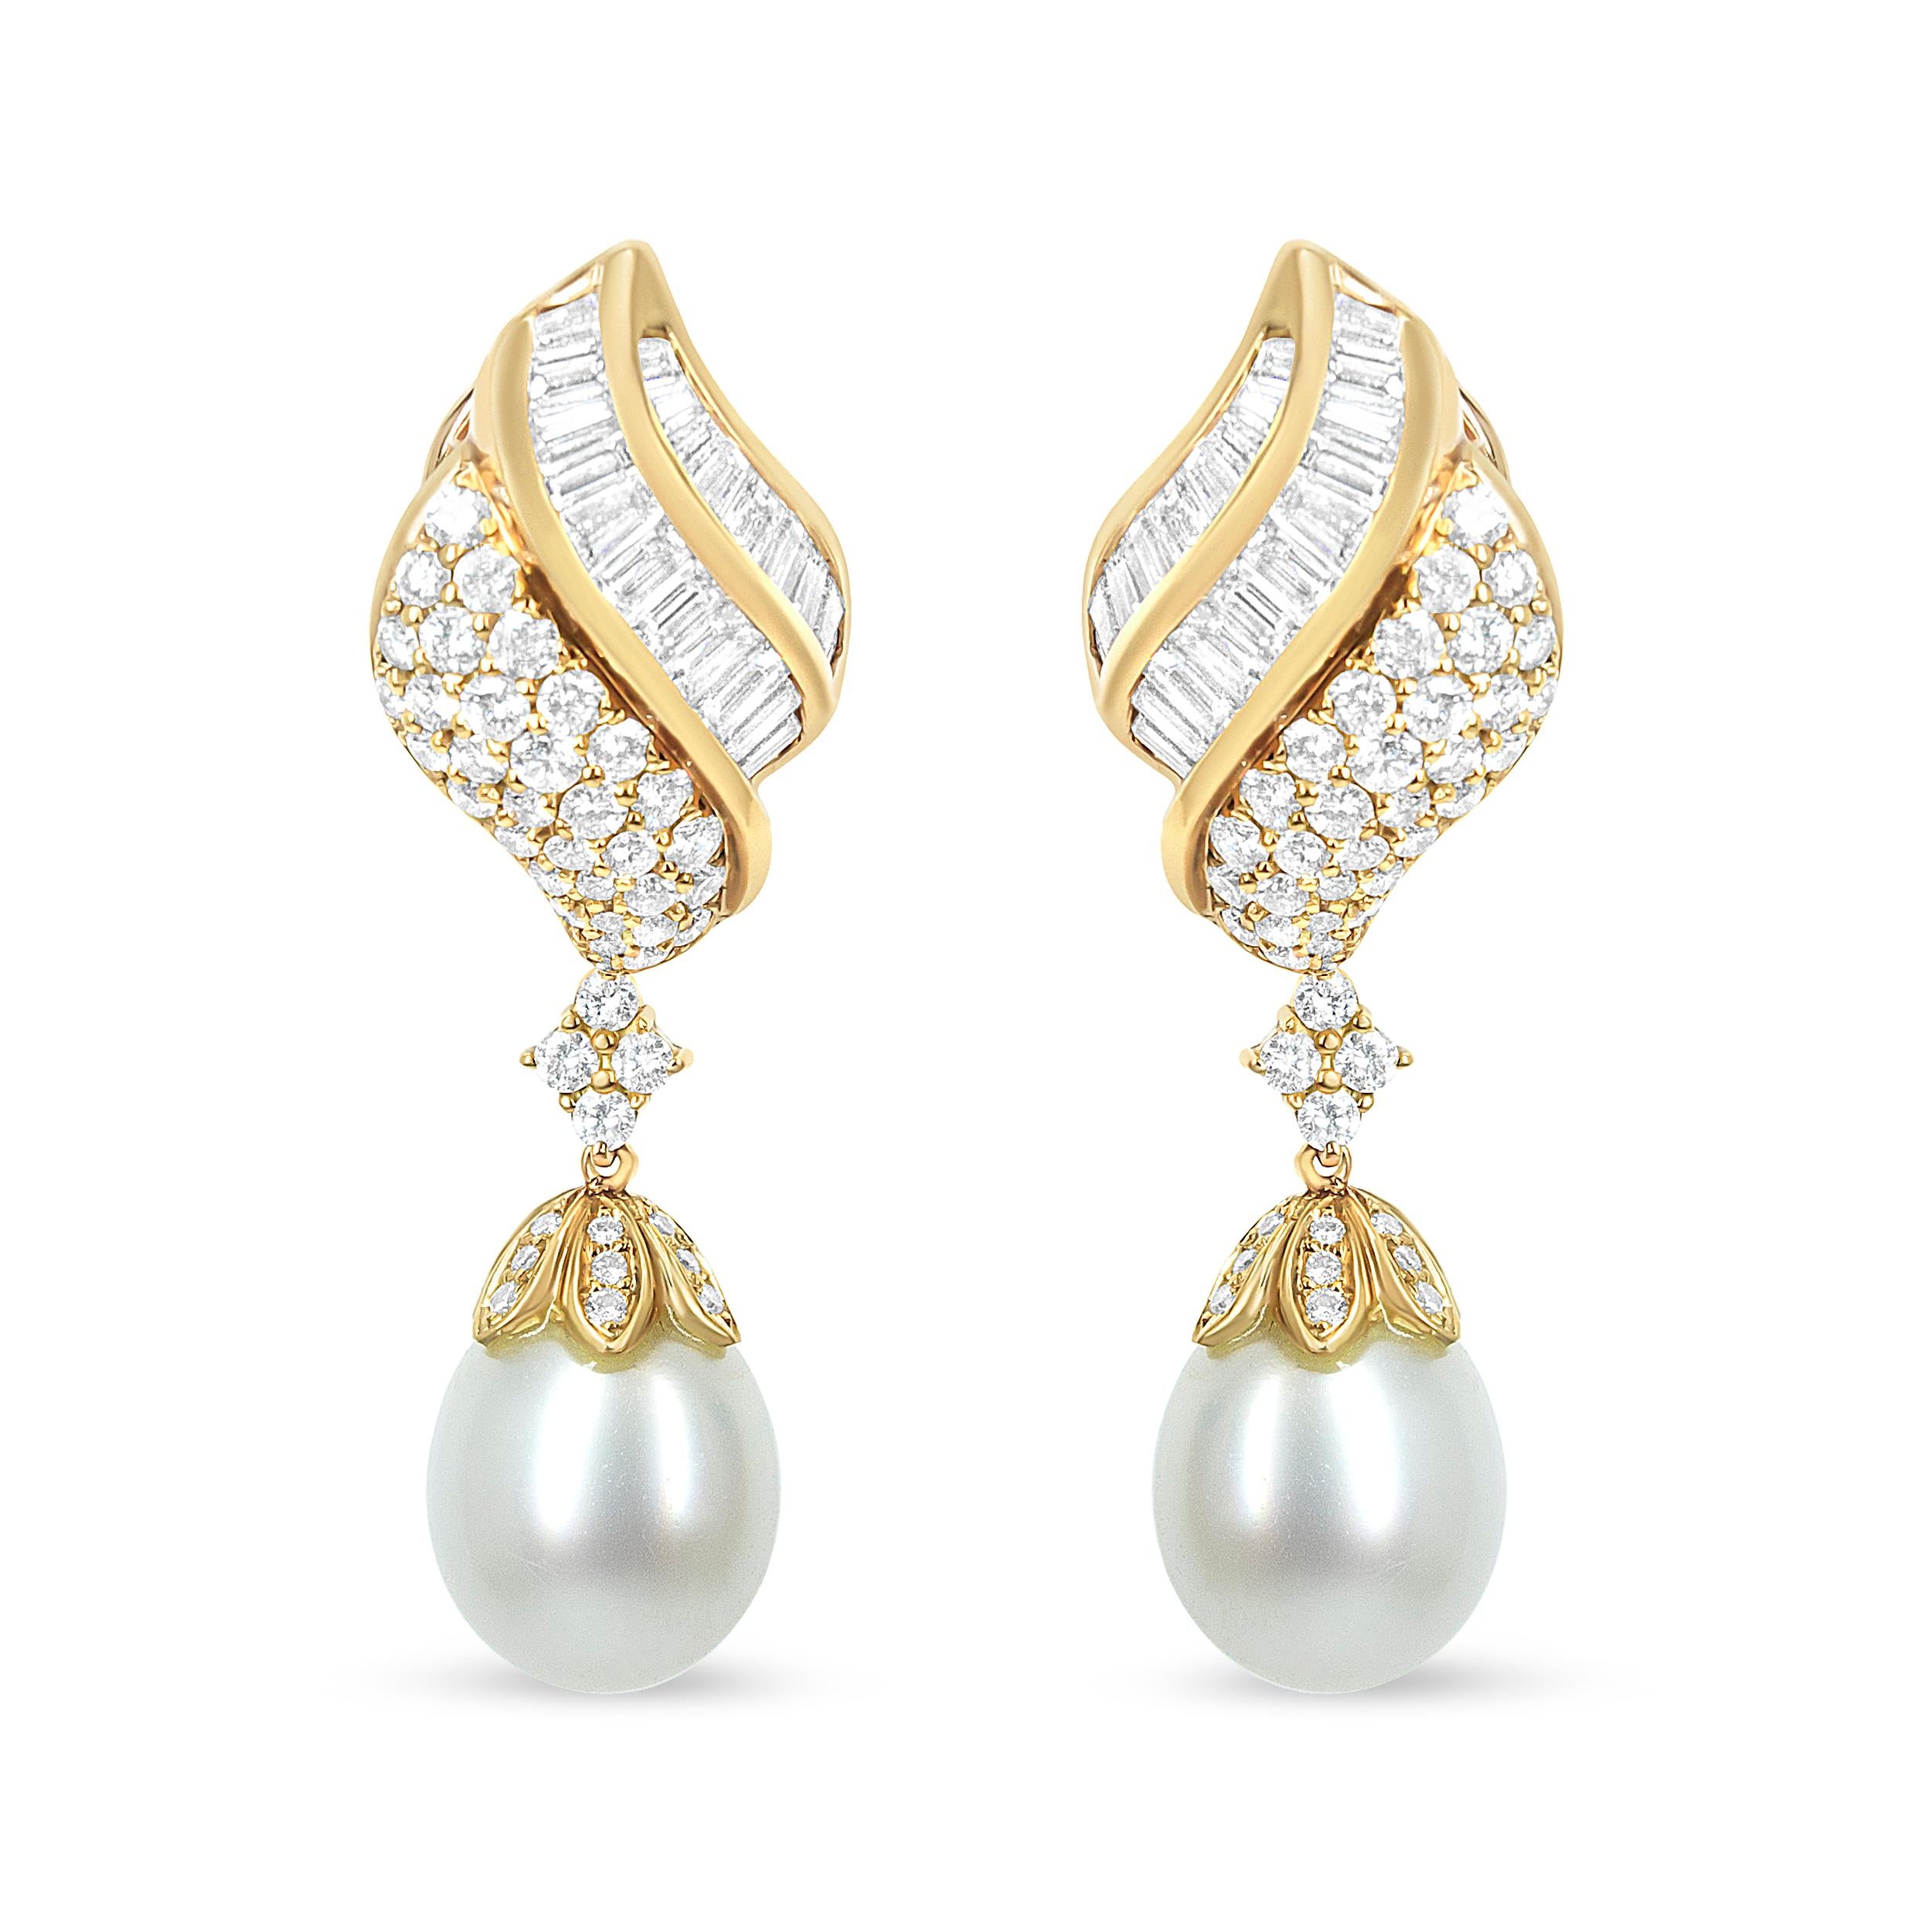 Delicate details indulge this spectacular pair of diamond South Sea pearl drop dangle earrings in splendid form. Crafted in fine 18k yellow gold, each earring features a lustrous 12.5-13.0mm South Sea cultured pearl set below an impressive array of